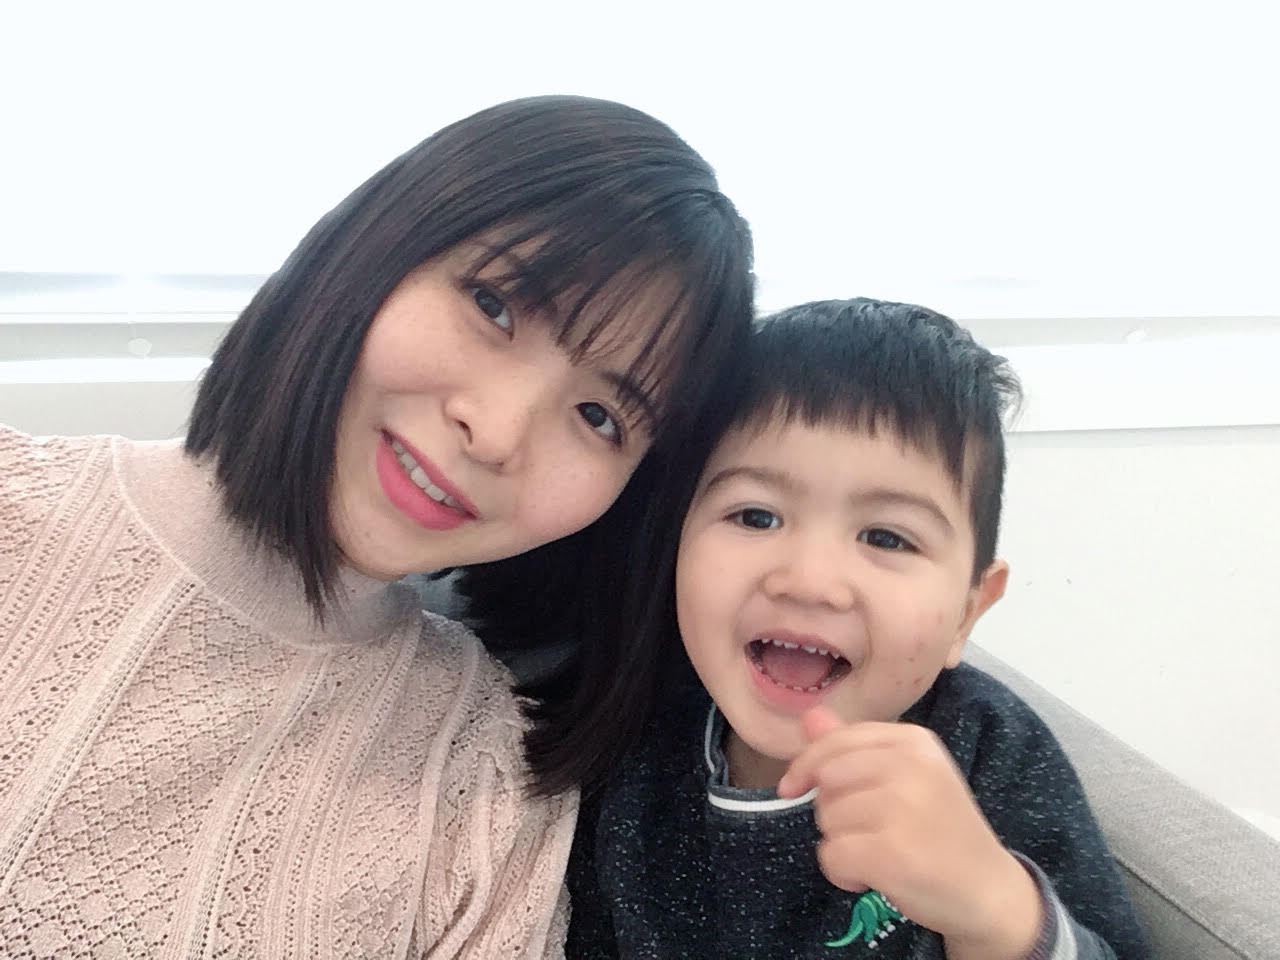 #OhhMoments - Hiromi Feitoza shares her story about her sons having severe allergies